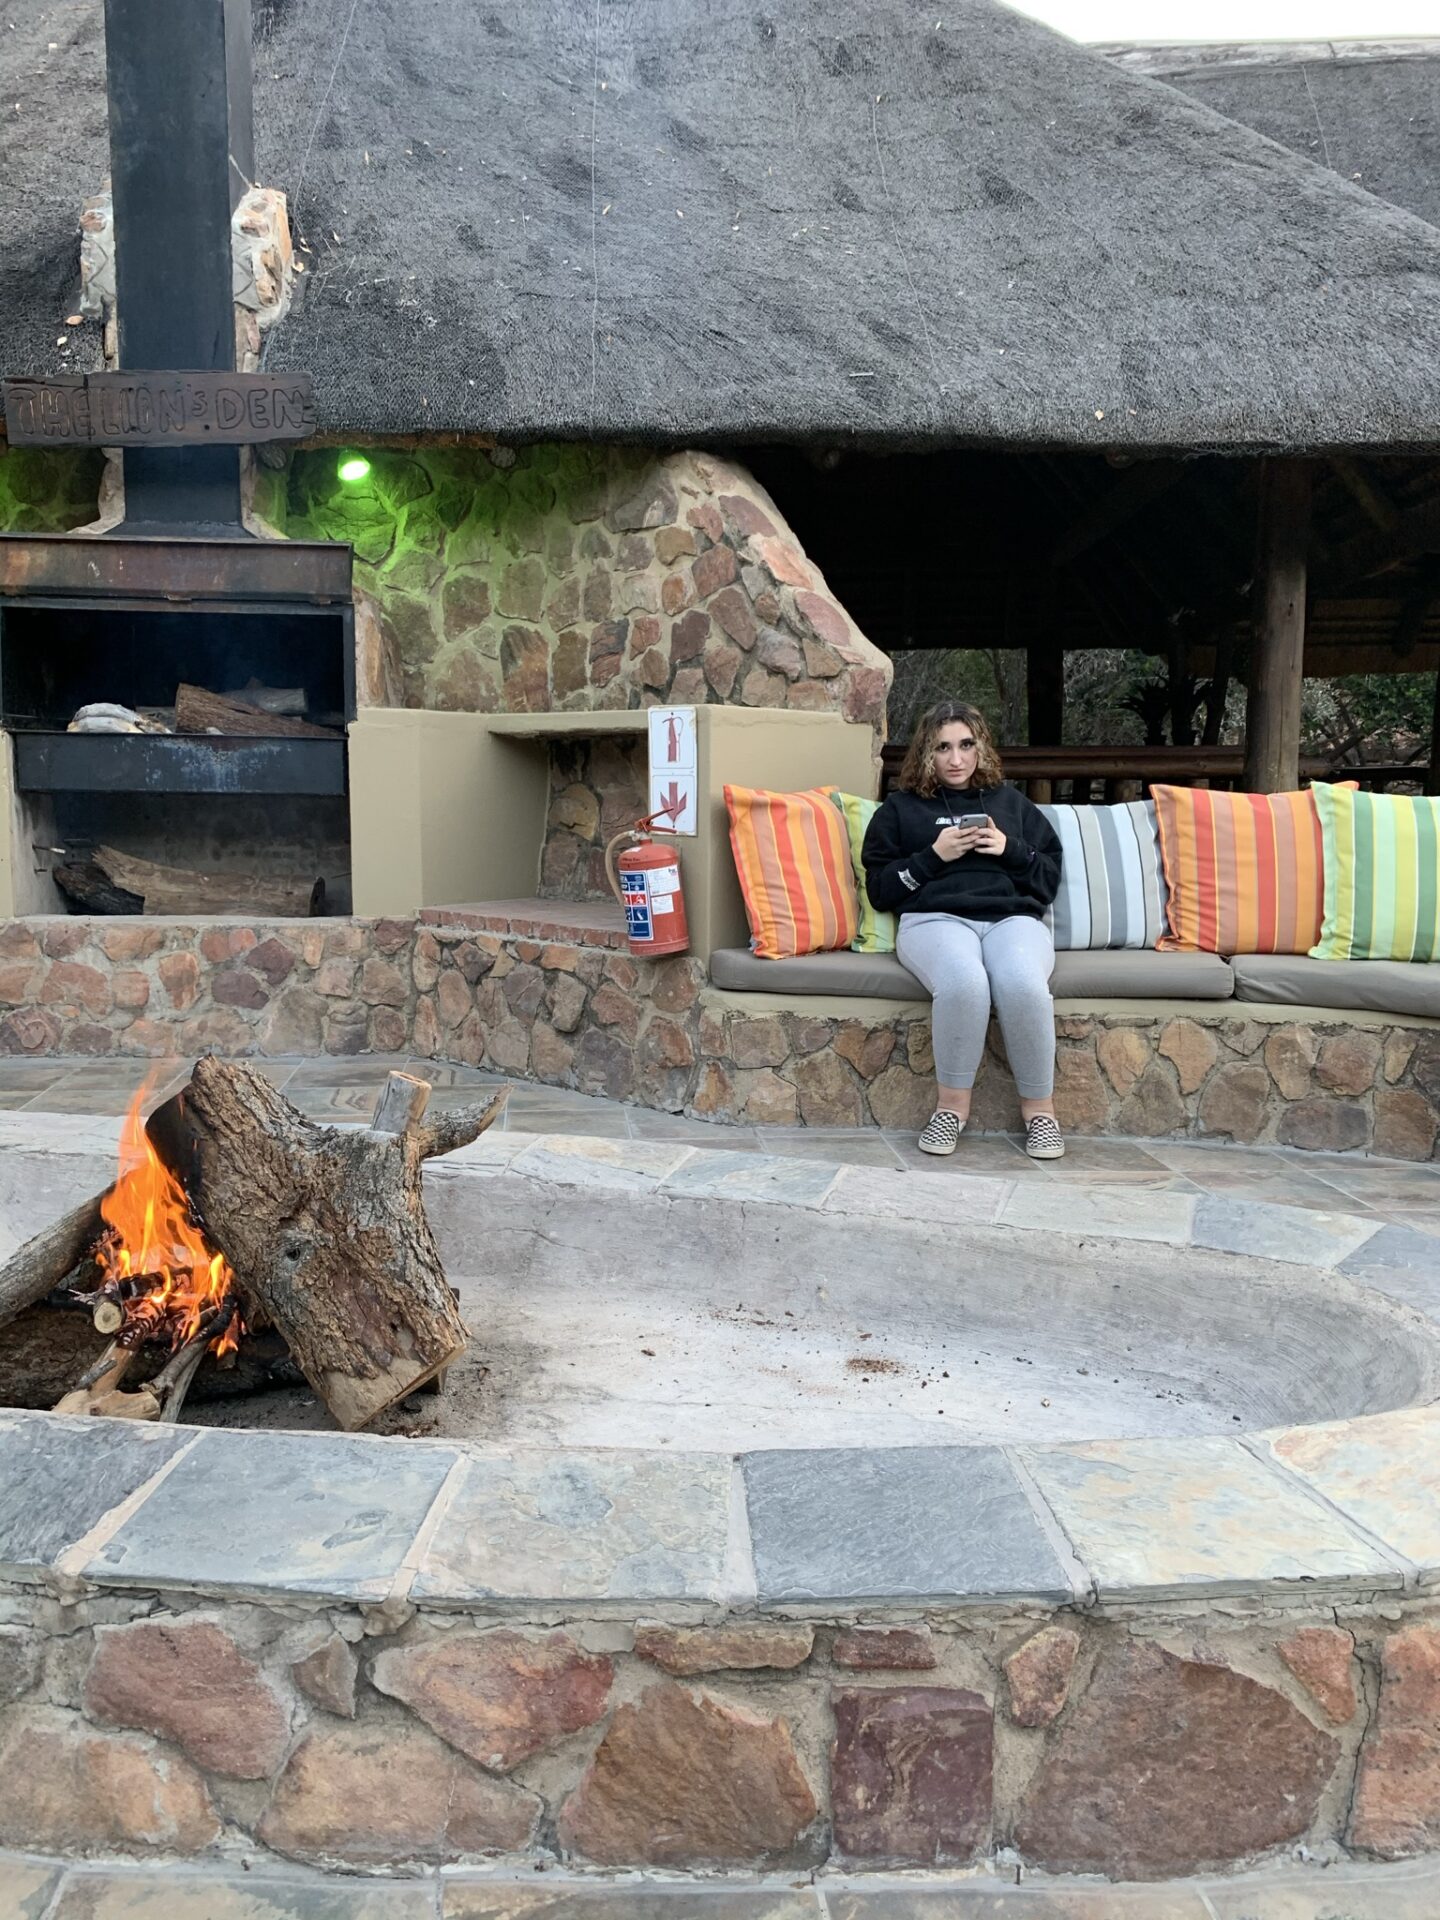 Ana at the fire pit - the only area with WIFI